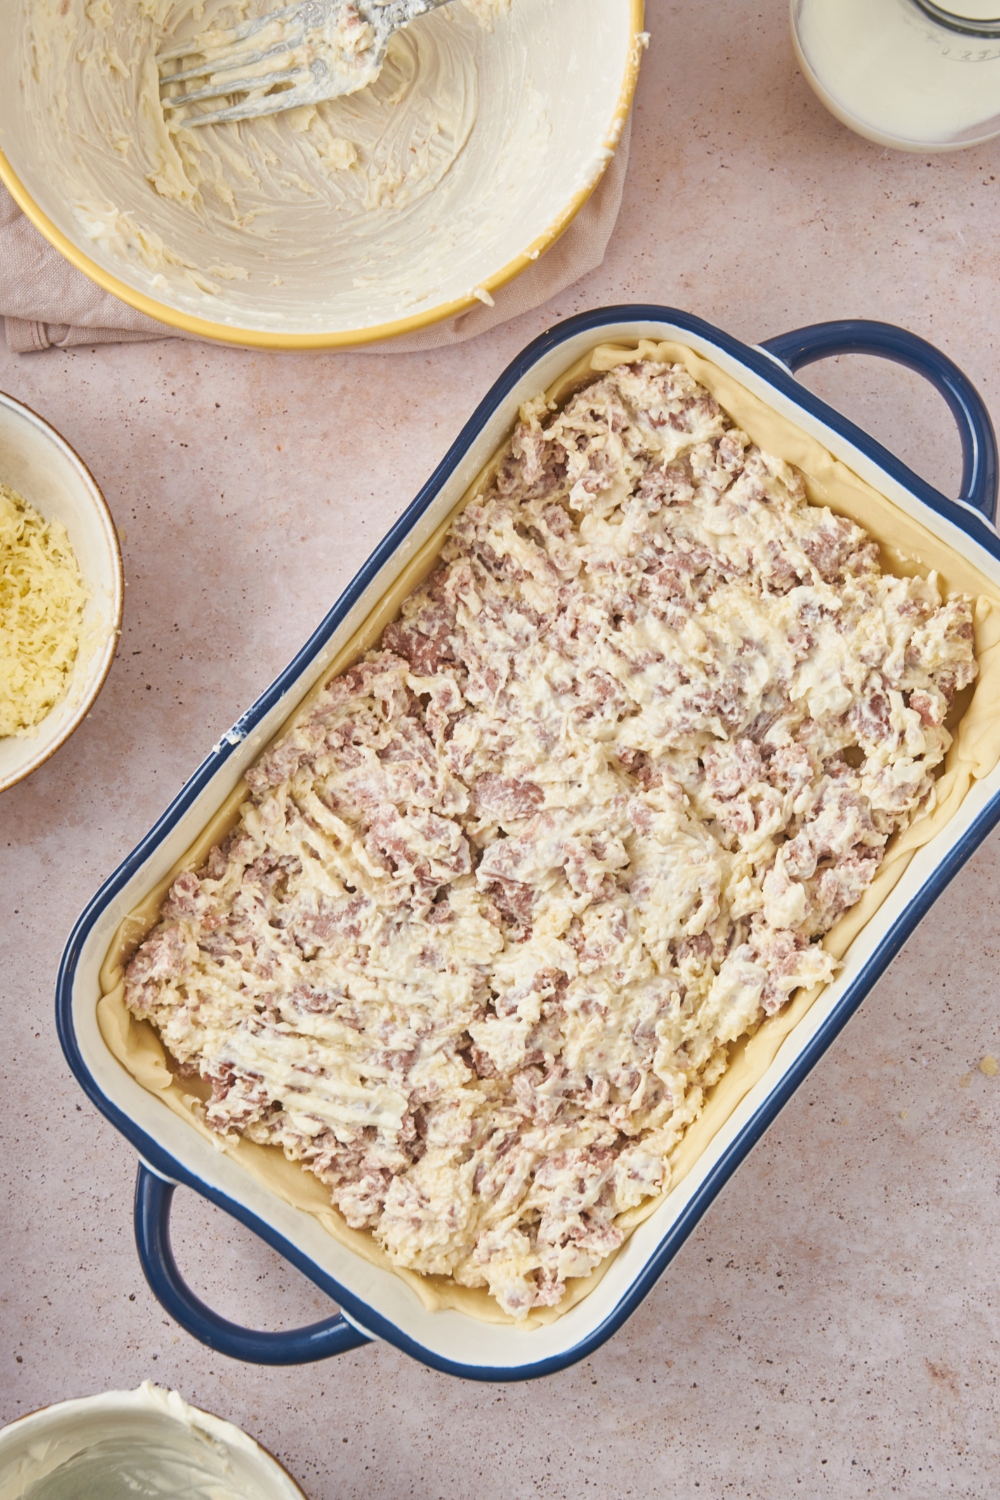 A cream cheese sausage mixture in a baking dish.